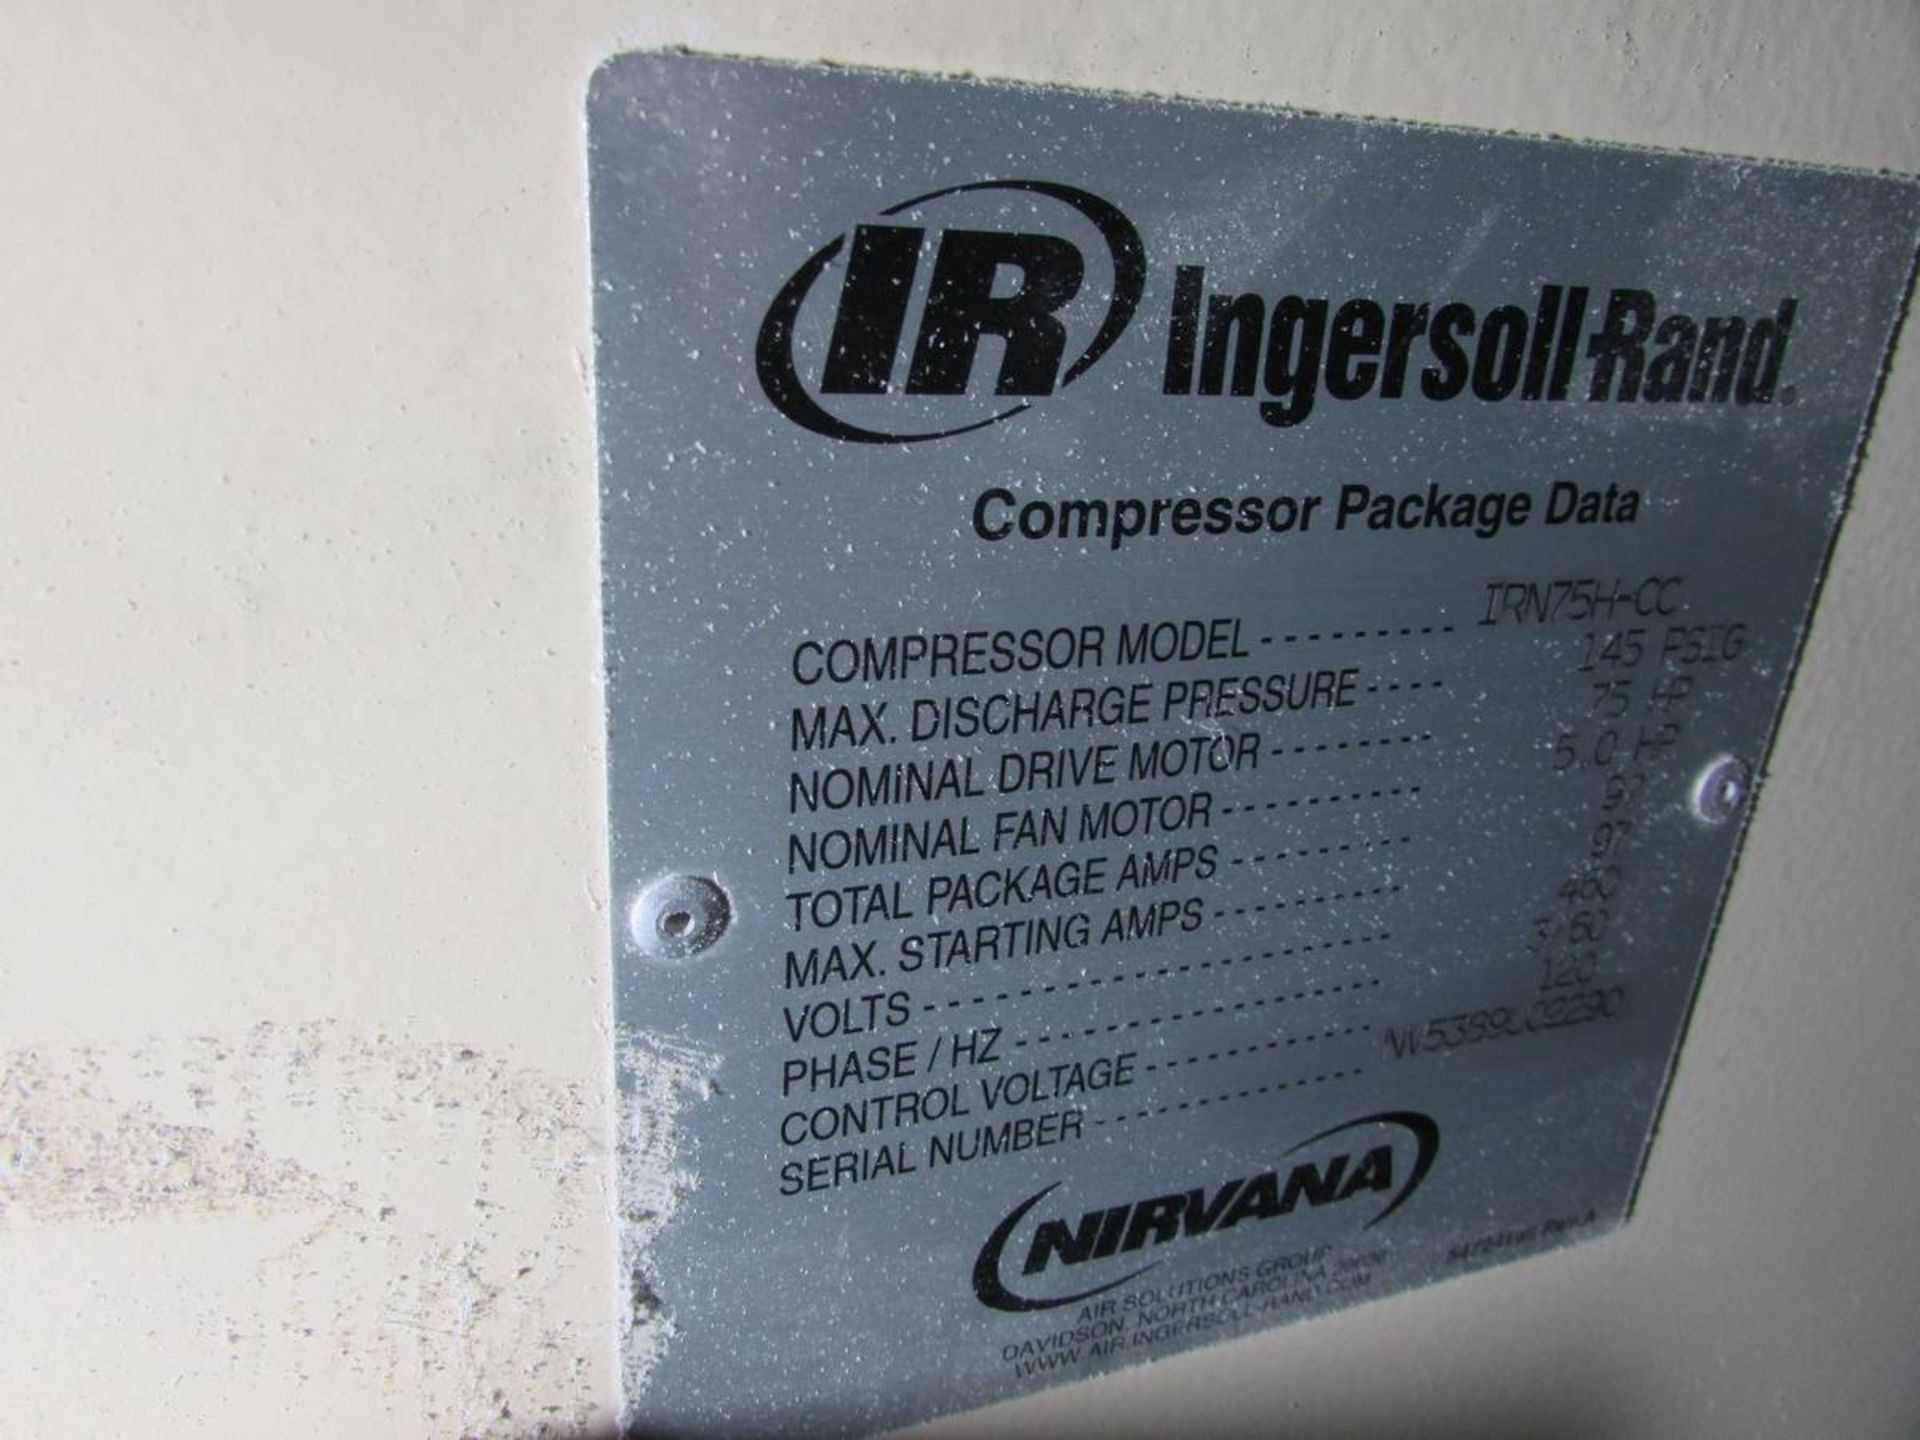 Ingersoll-Rand IRN75H-CC 75HP Rotary Screw Air Compressor - Image 5 of 5